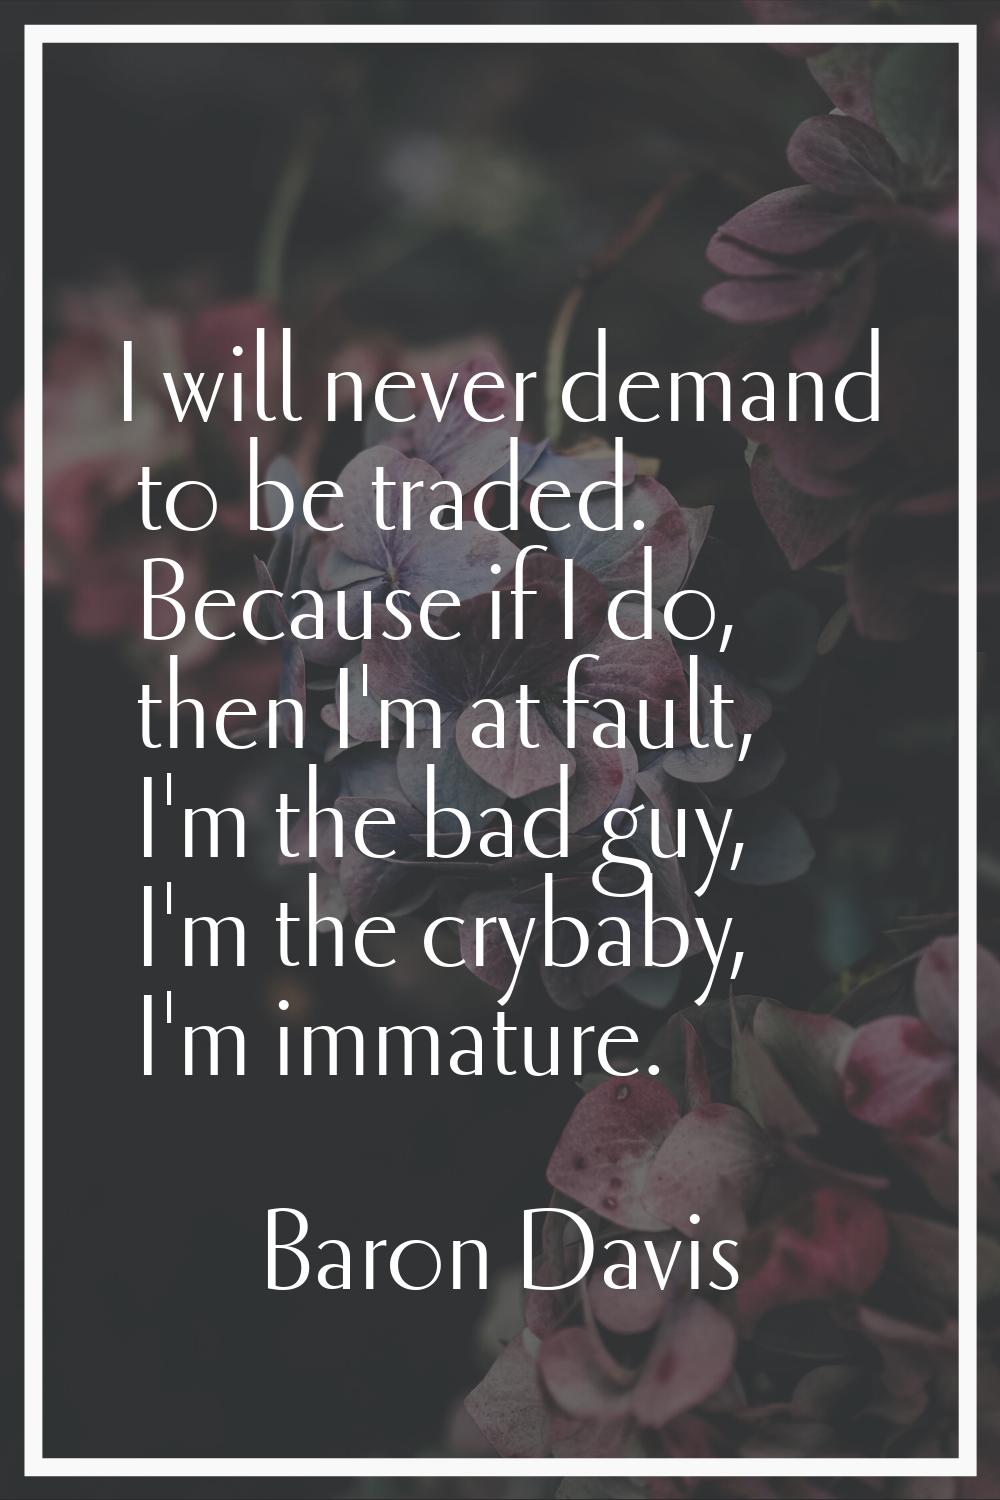 I will never demand to be traded. Because if I do, then I'm at fault, I'm the bad guy, I'm the cryb